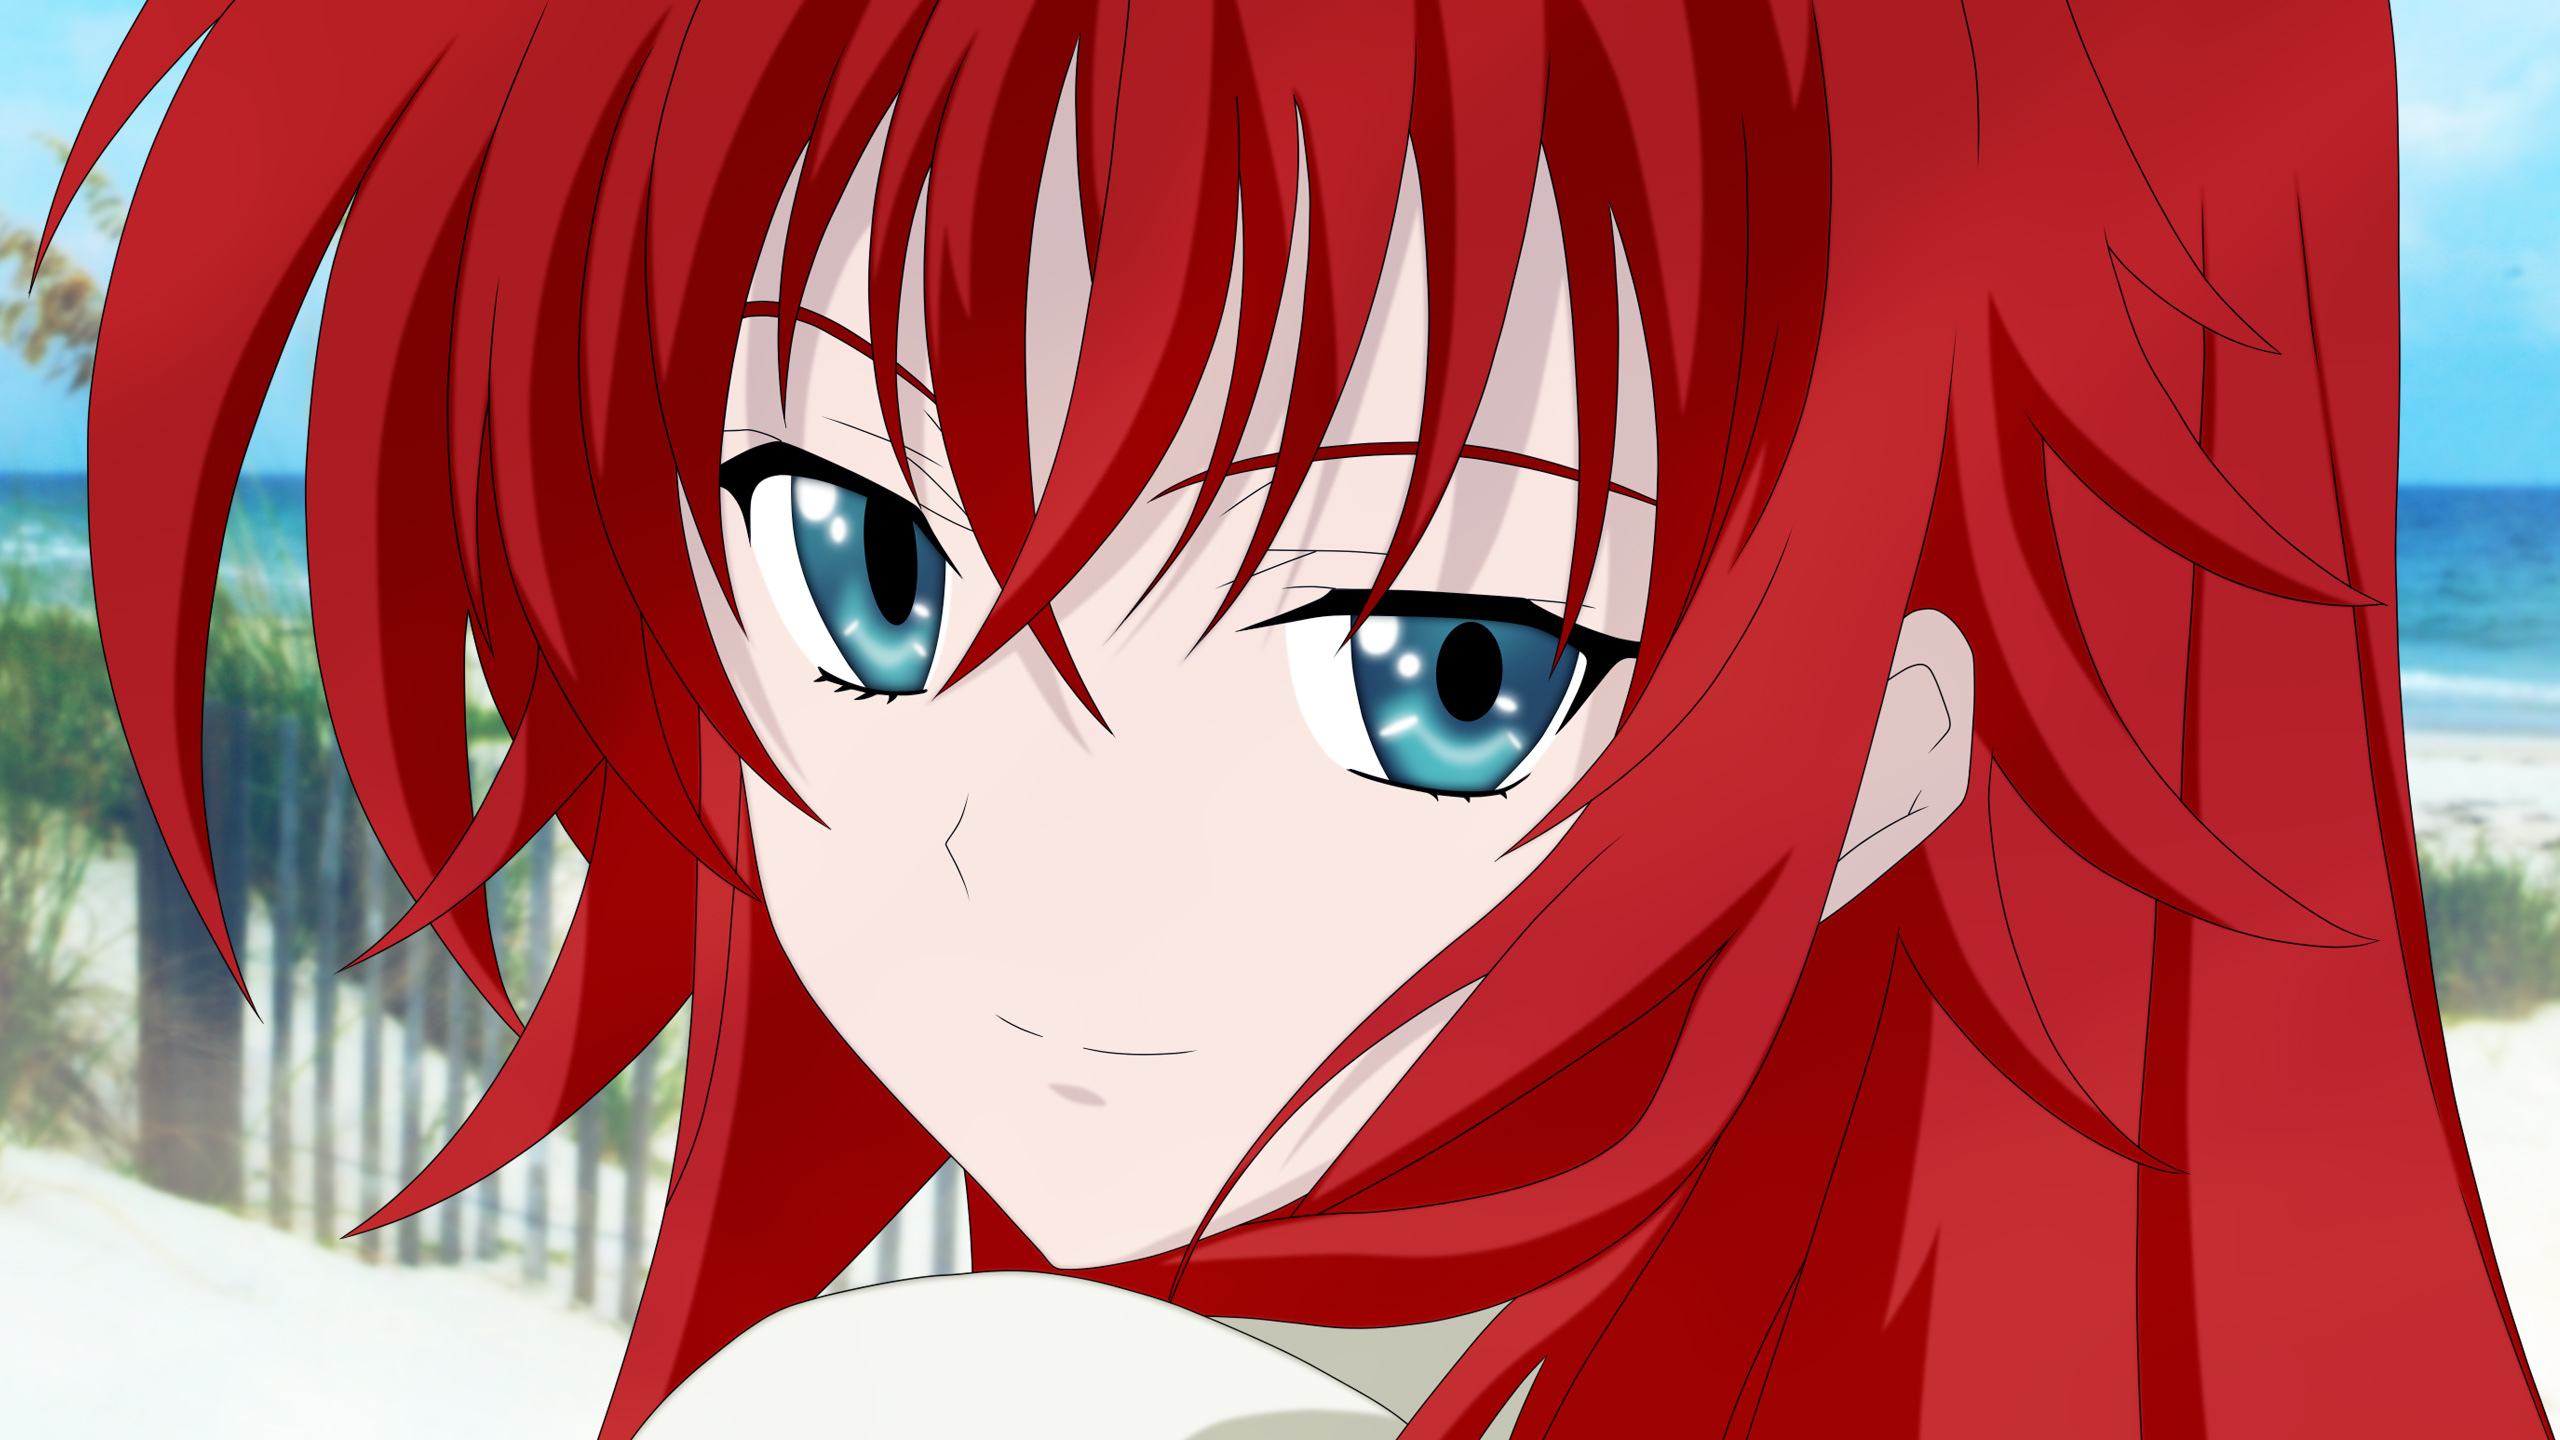 7. "Rias Gremory" from High School DxD - wide 5